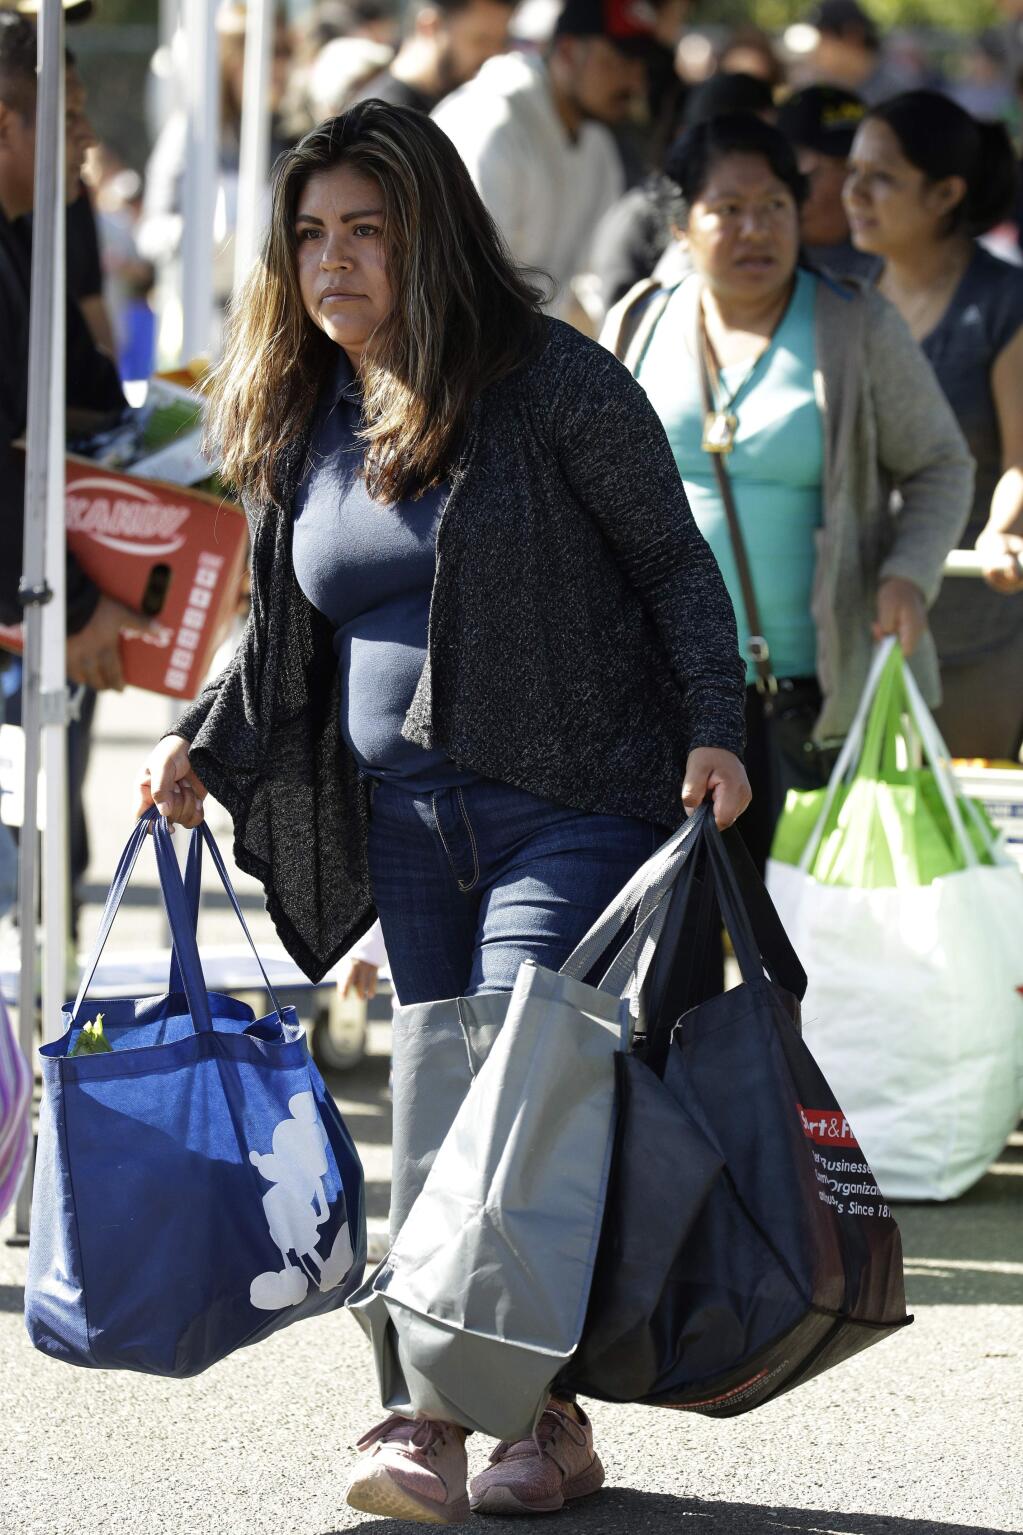 People gather items during a free food distribution for migrant workers evacuated because of the Kincade fire Thursday, Oct. 31, 2019, in Healdsburg, Calif. (AP Photo/Charlie Riedel)